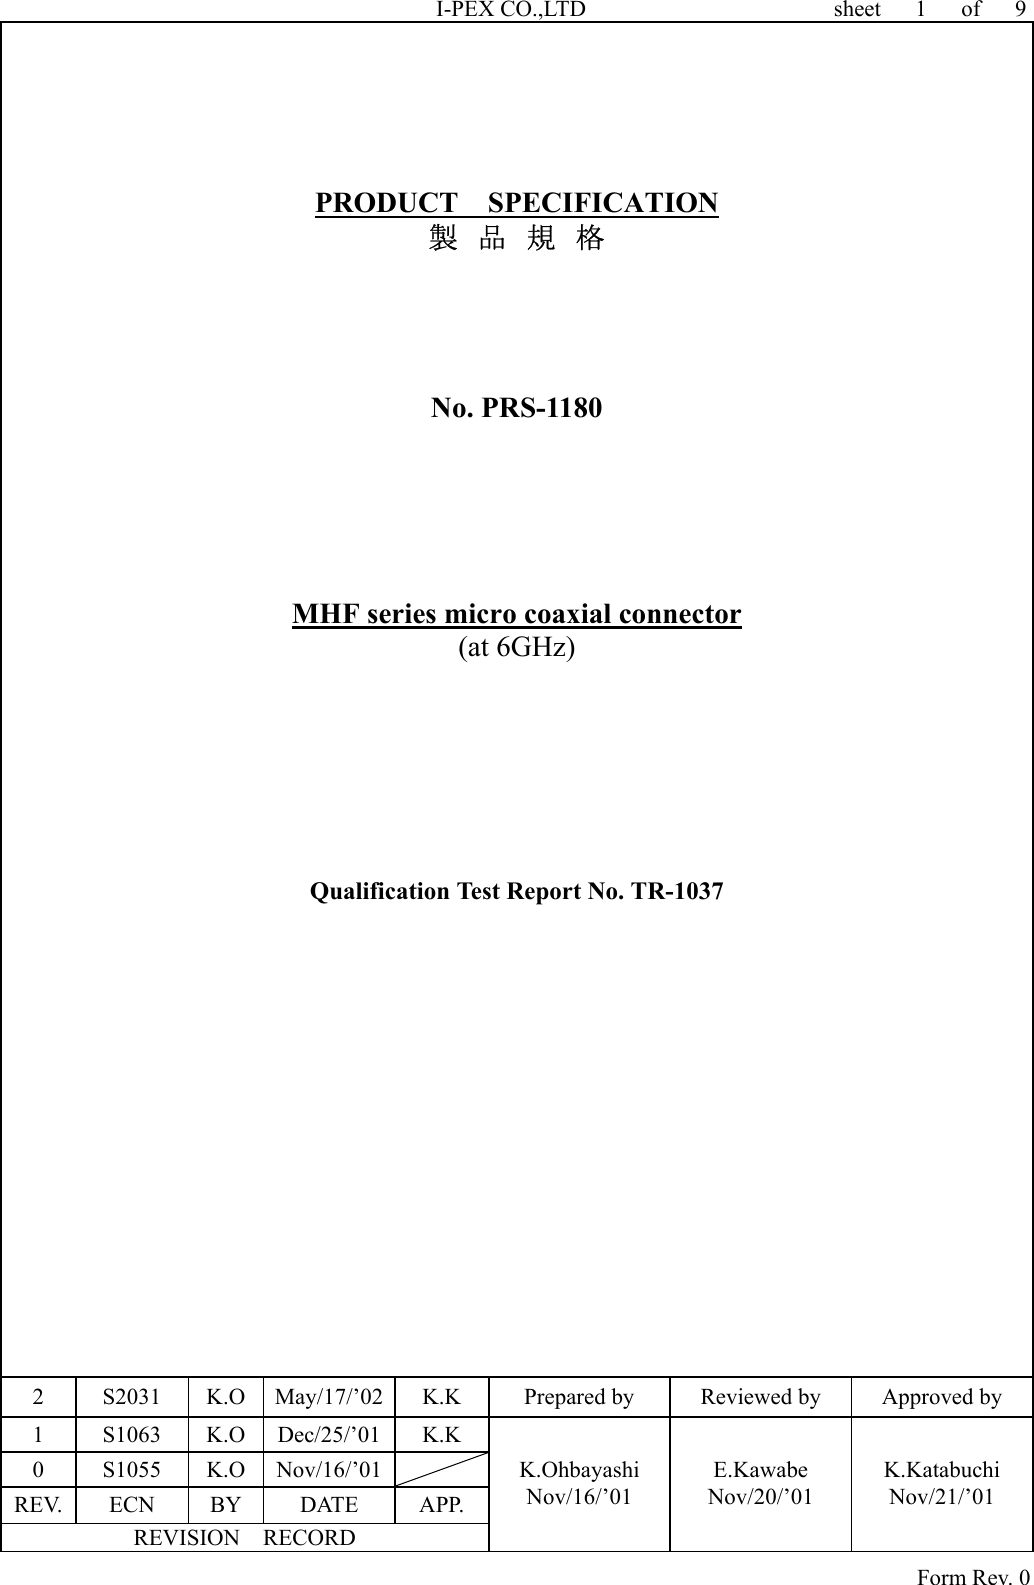 I-PEX CO.,LTD                 sheet   1   of   9       PRODUCT  SPECIFICATION 製  品  規  格     No. PRS-1180      MHF series micro coaxial connector (at 6GHz)         Qualification Test Report No. TR-1037   2  S2031  K.O  May/17/’02  K.K  Prepared by  Reviewed by  Approved by 1 S1063 K.O Dec/25/’01 K.K 0 S1055 K.O Nov/16/’01  REV. ECN  BY  DATE  APP. REVISION  RECORD K.Ohbayashi Nov/16/’01 E.Kawabe Nov/20/’01 K.Katabuchi Nov/21/’01                                                                                Form Rev. 0 